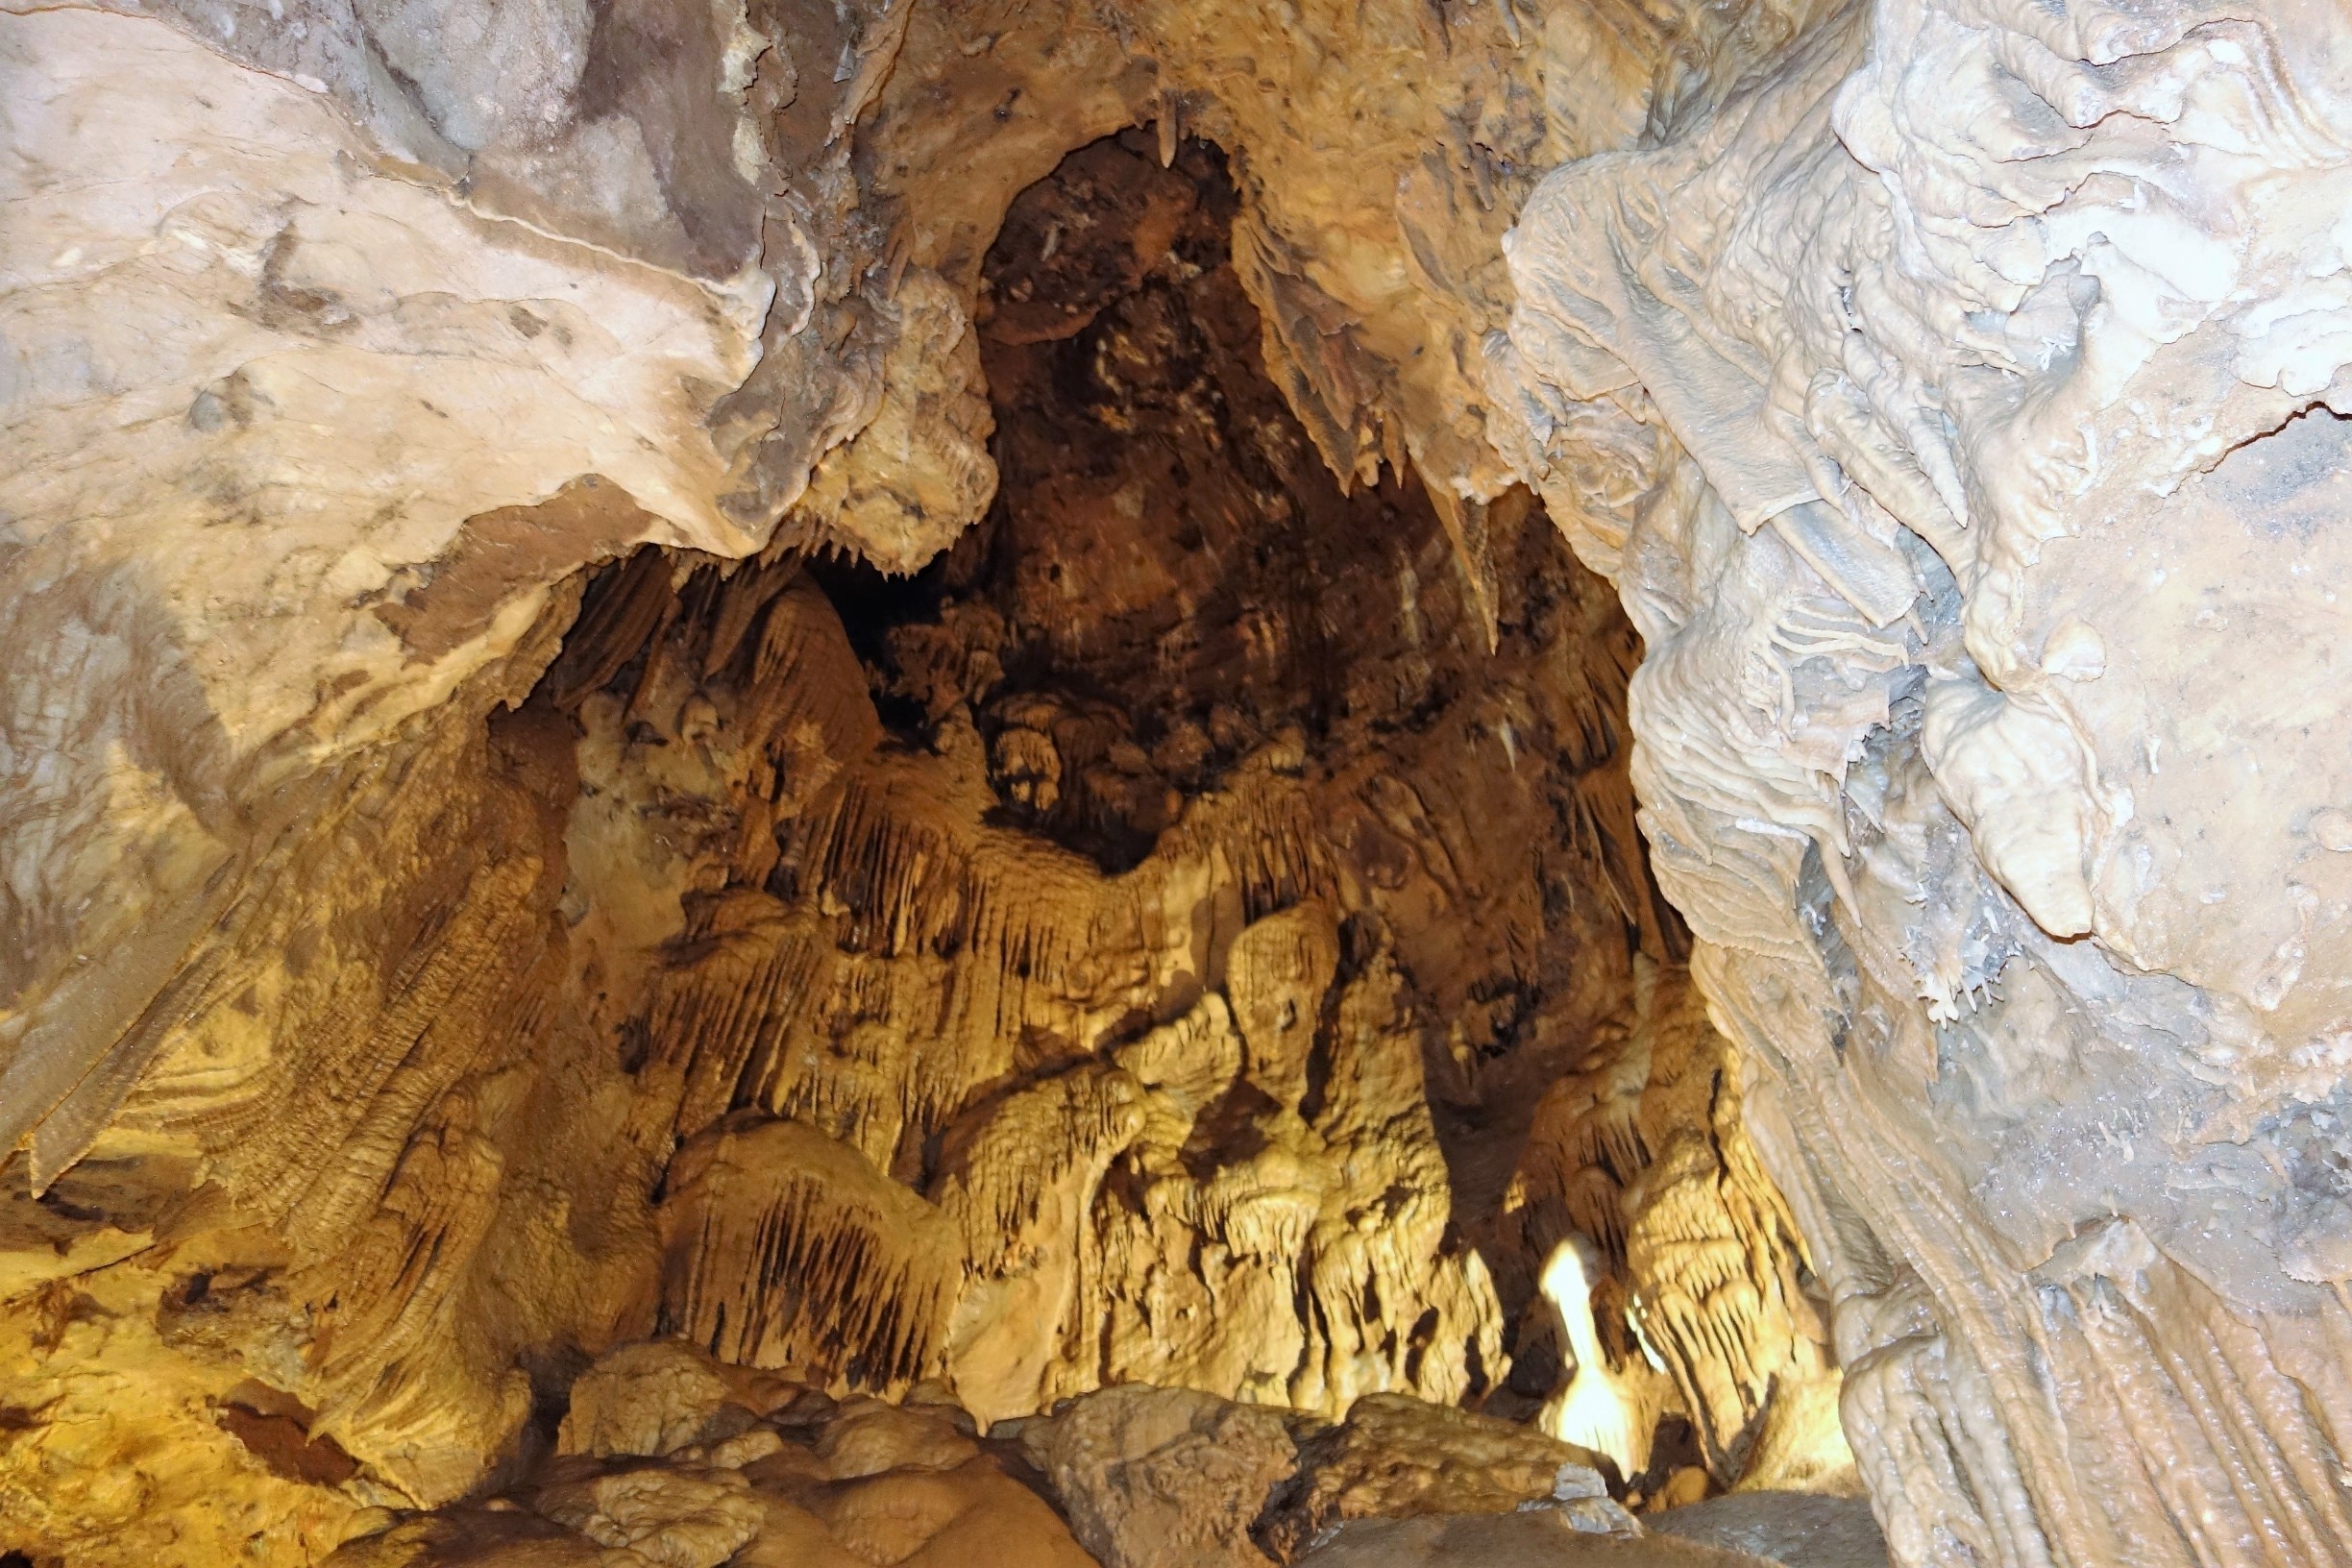 The Lake Shasta Caverns are a network of caves located near the McCloud arm of Shasta Lake in California